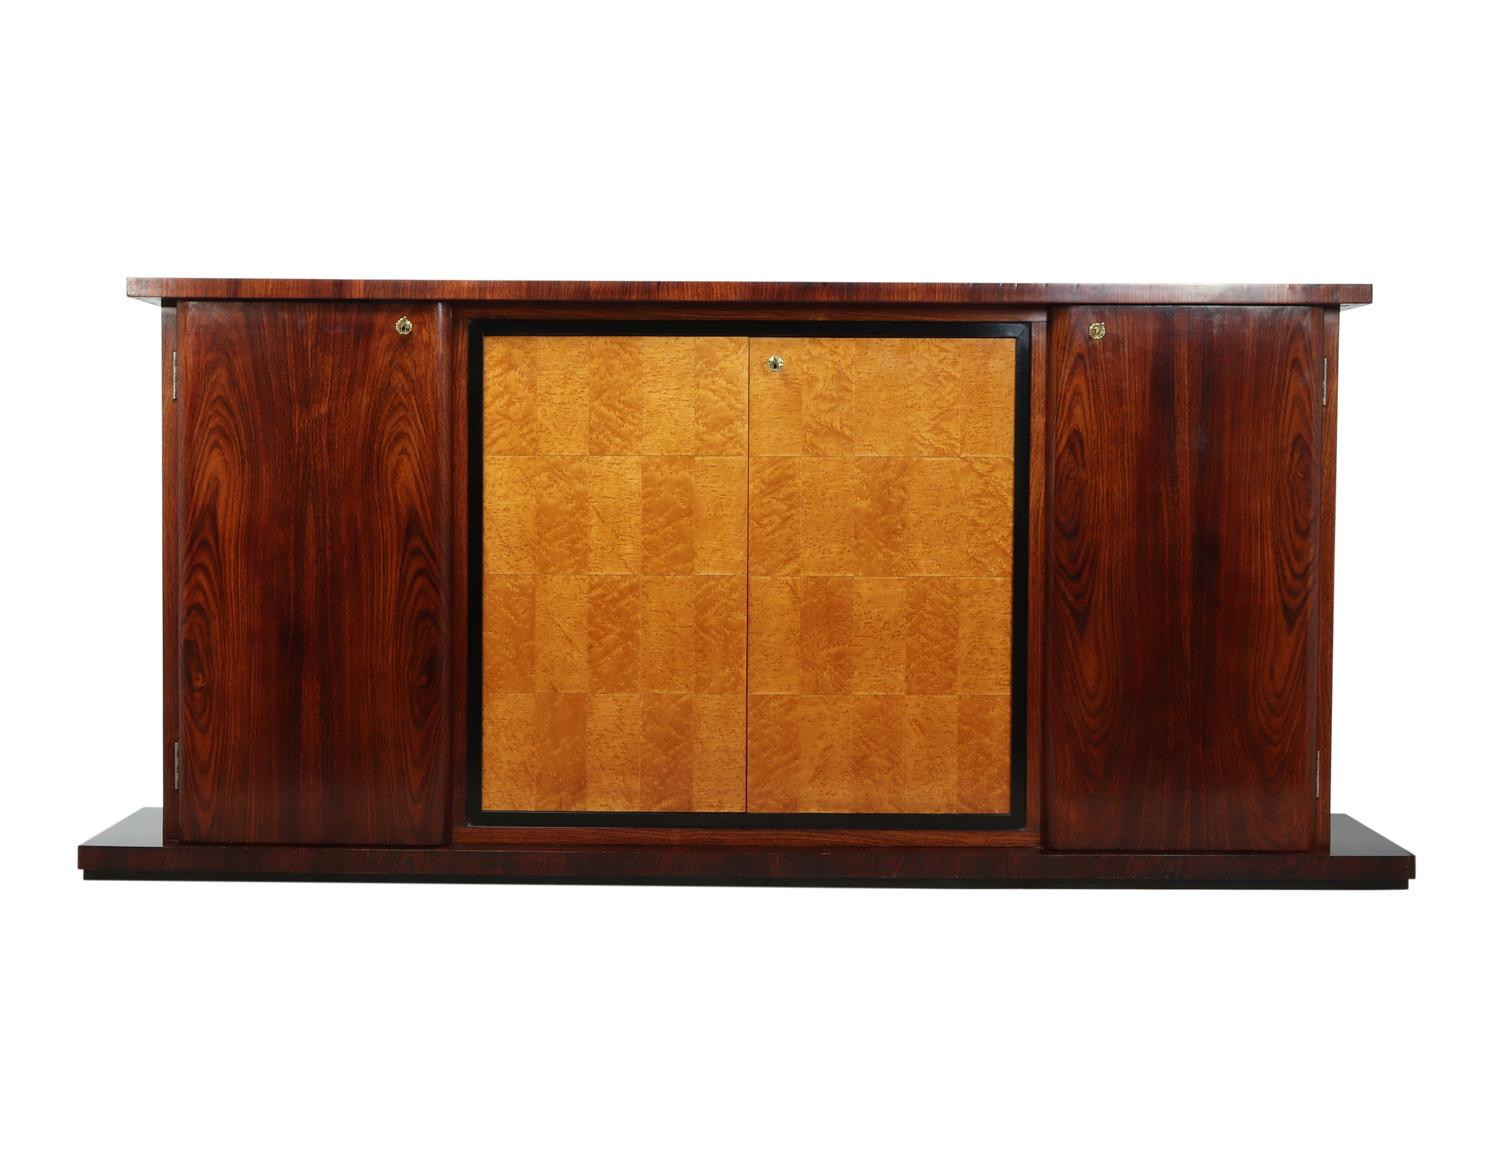 Italian Art Deco sideboard in rosewood and bird's-eye maple
A very large and slim Art Deco sideboard produced in Italy in the 1930s with four doors, these have a single shelf behind every lock has a key and all in working order, the sideboard has